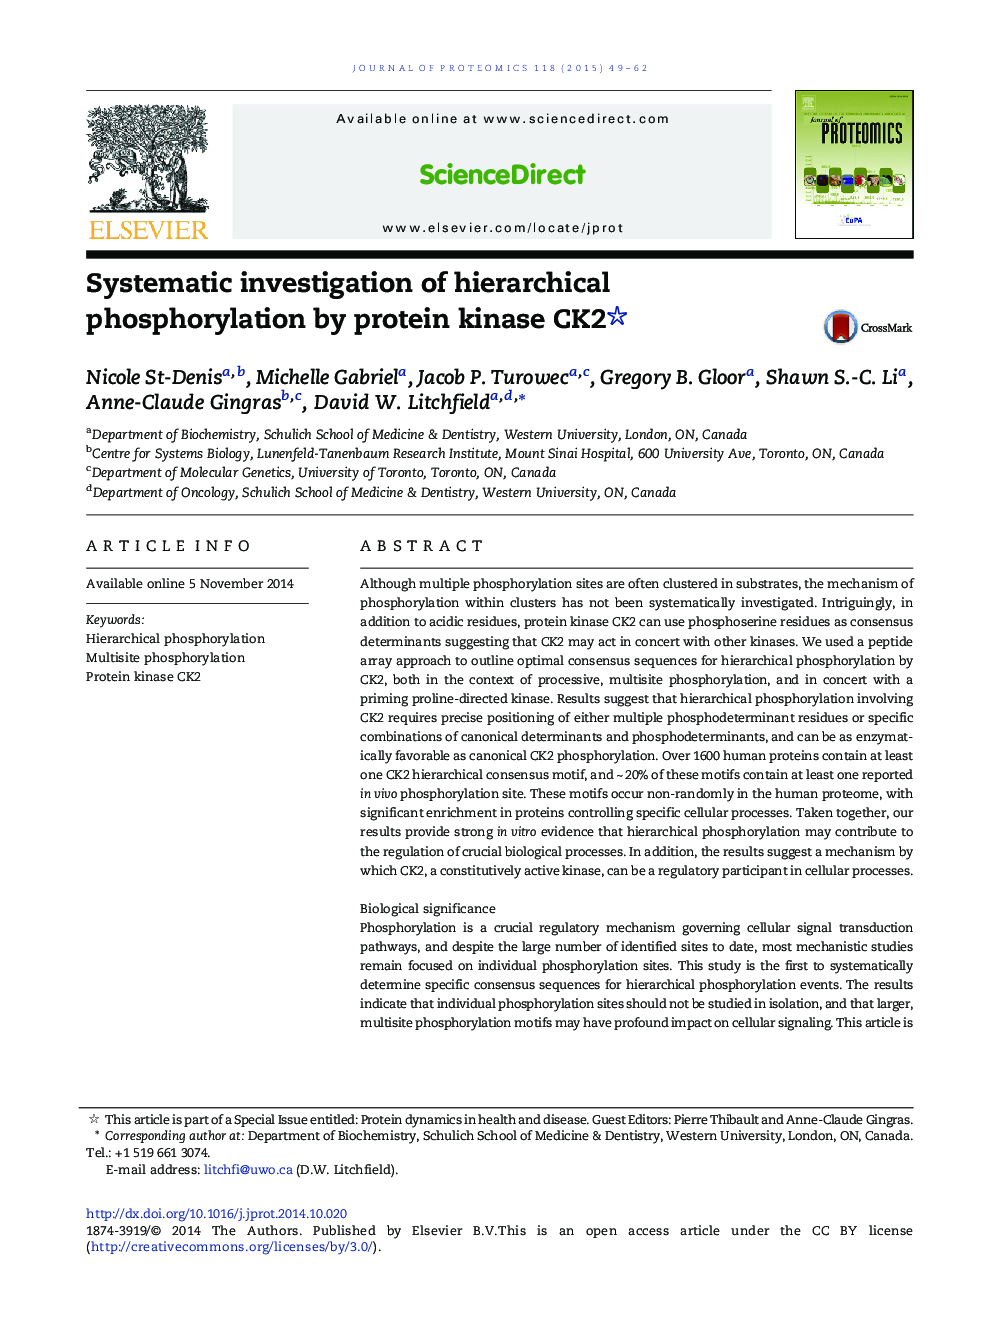 Systematic investigation of hierarchical phosphorylation by protein kinase CK2